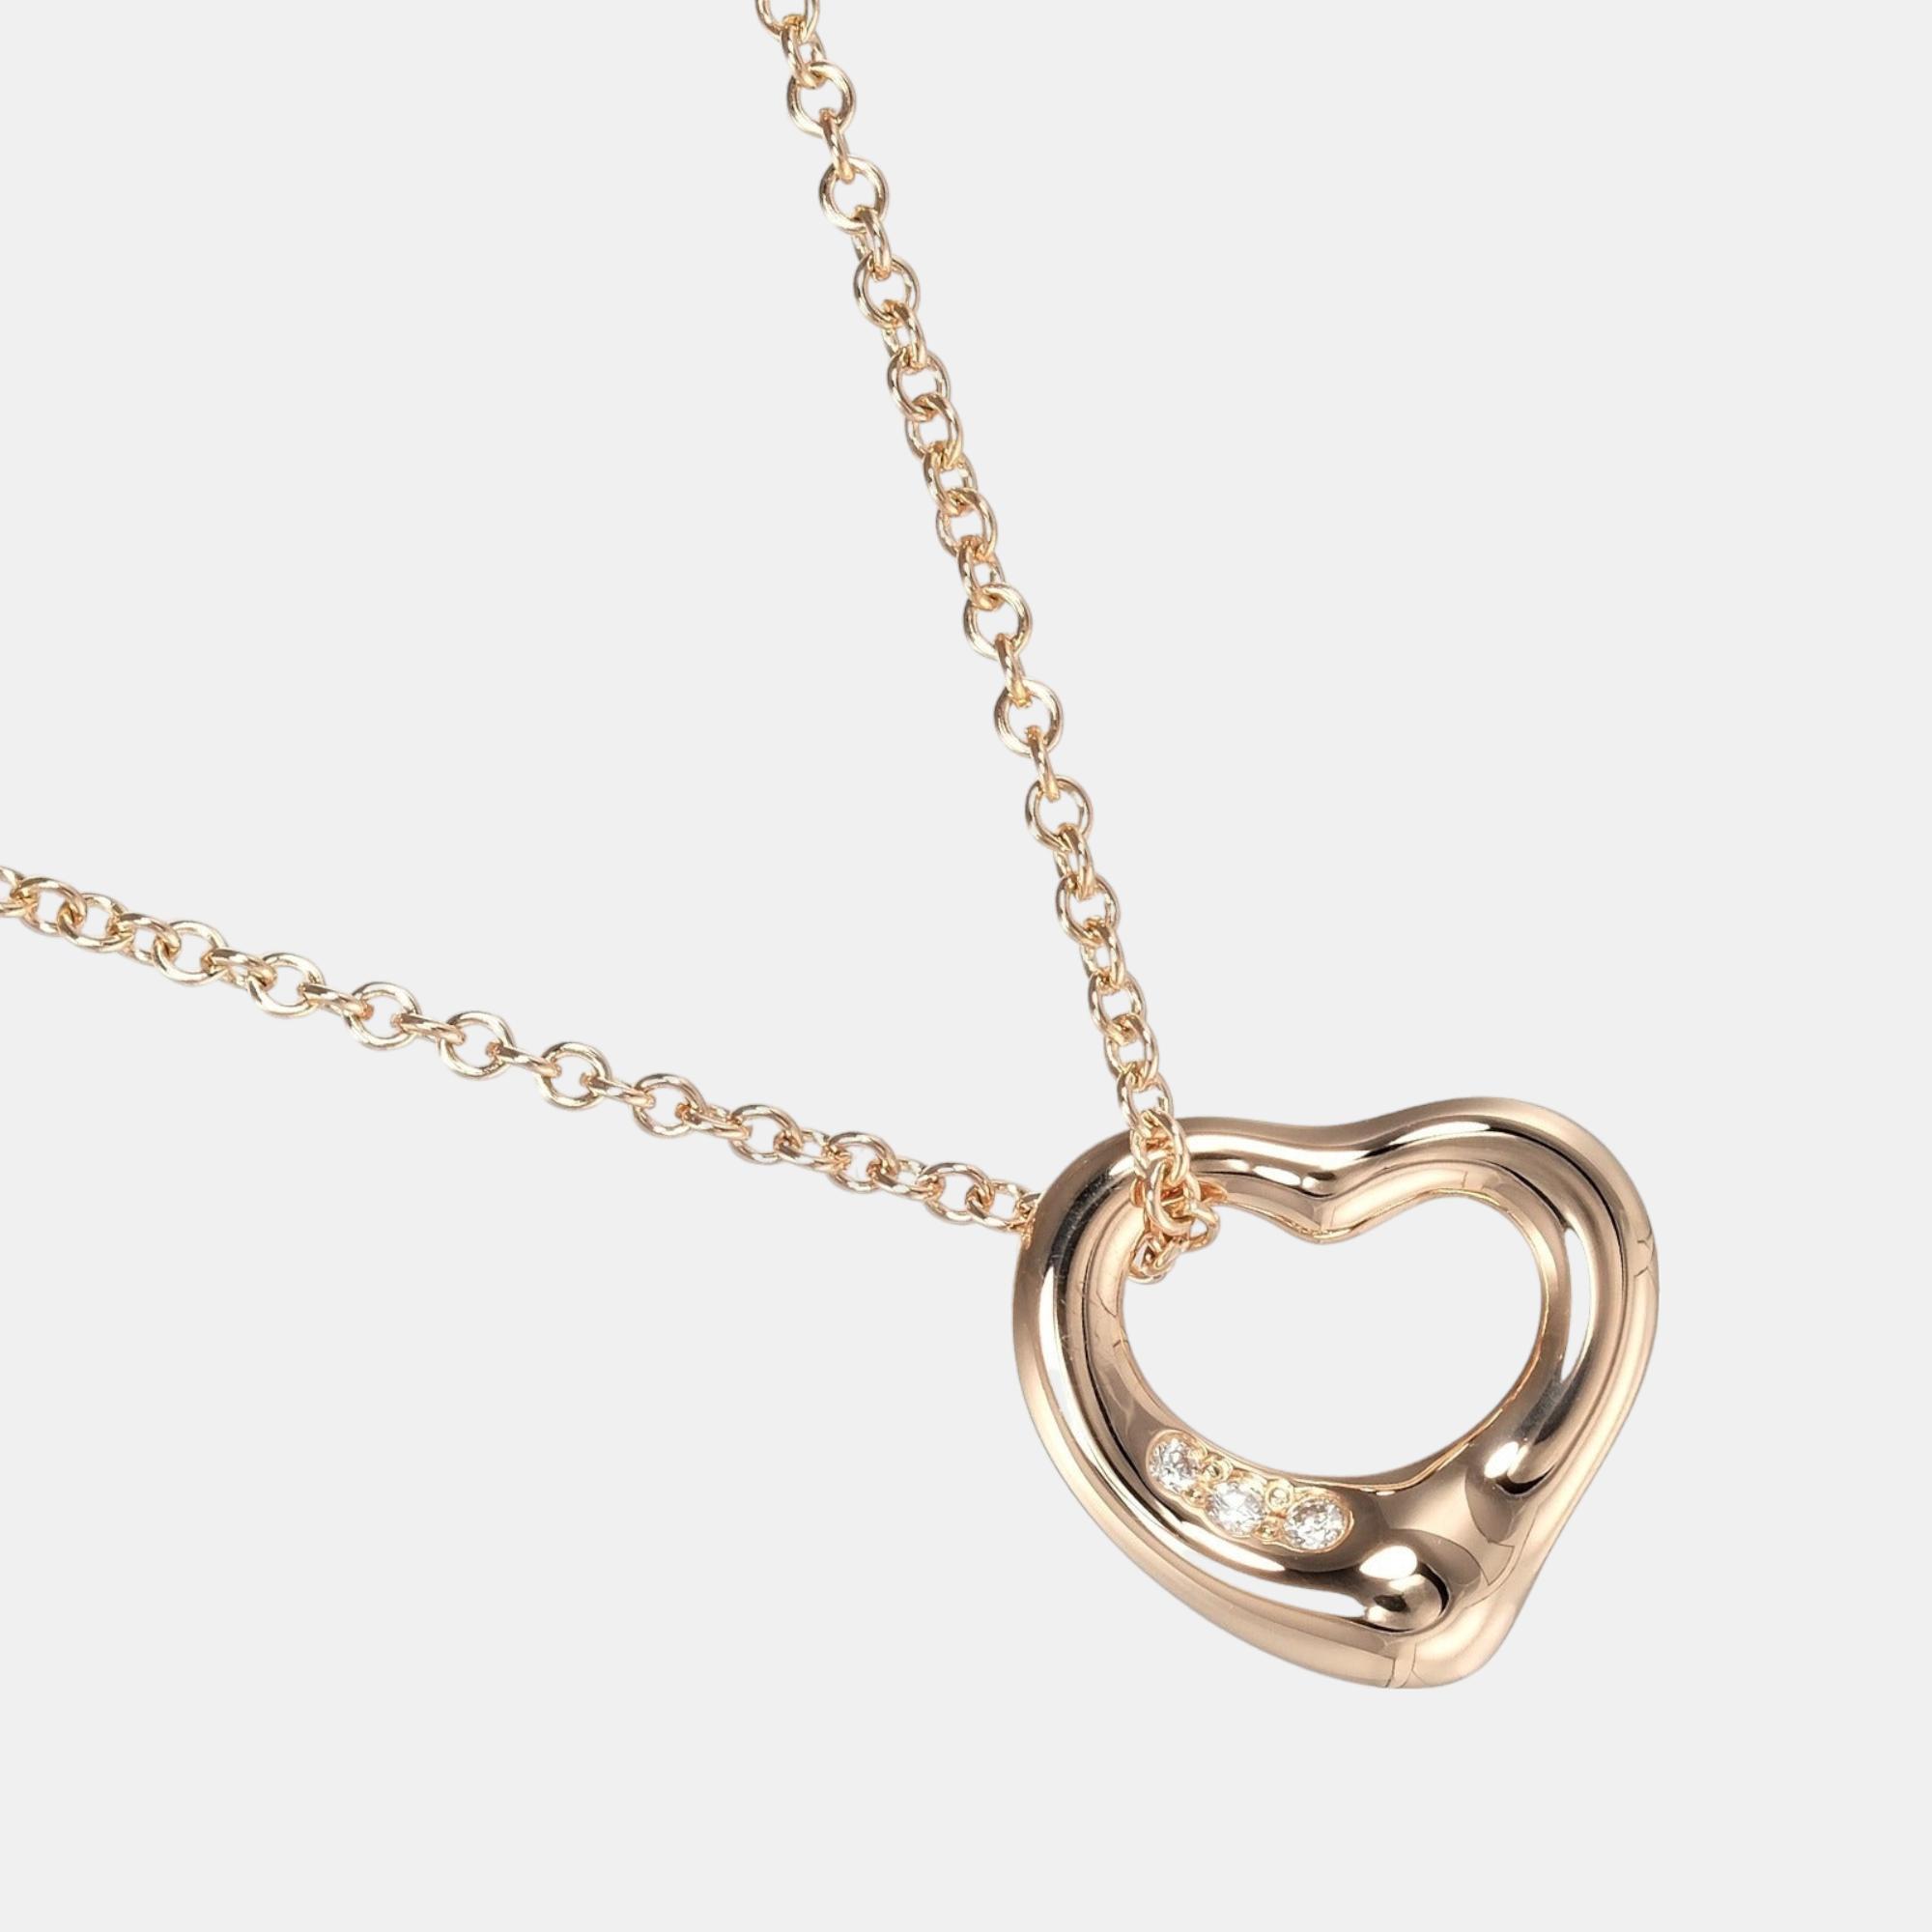 Tiffany & co 18k yellow gold open heart necklace